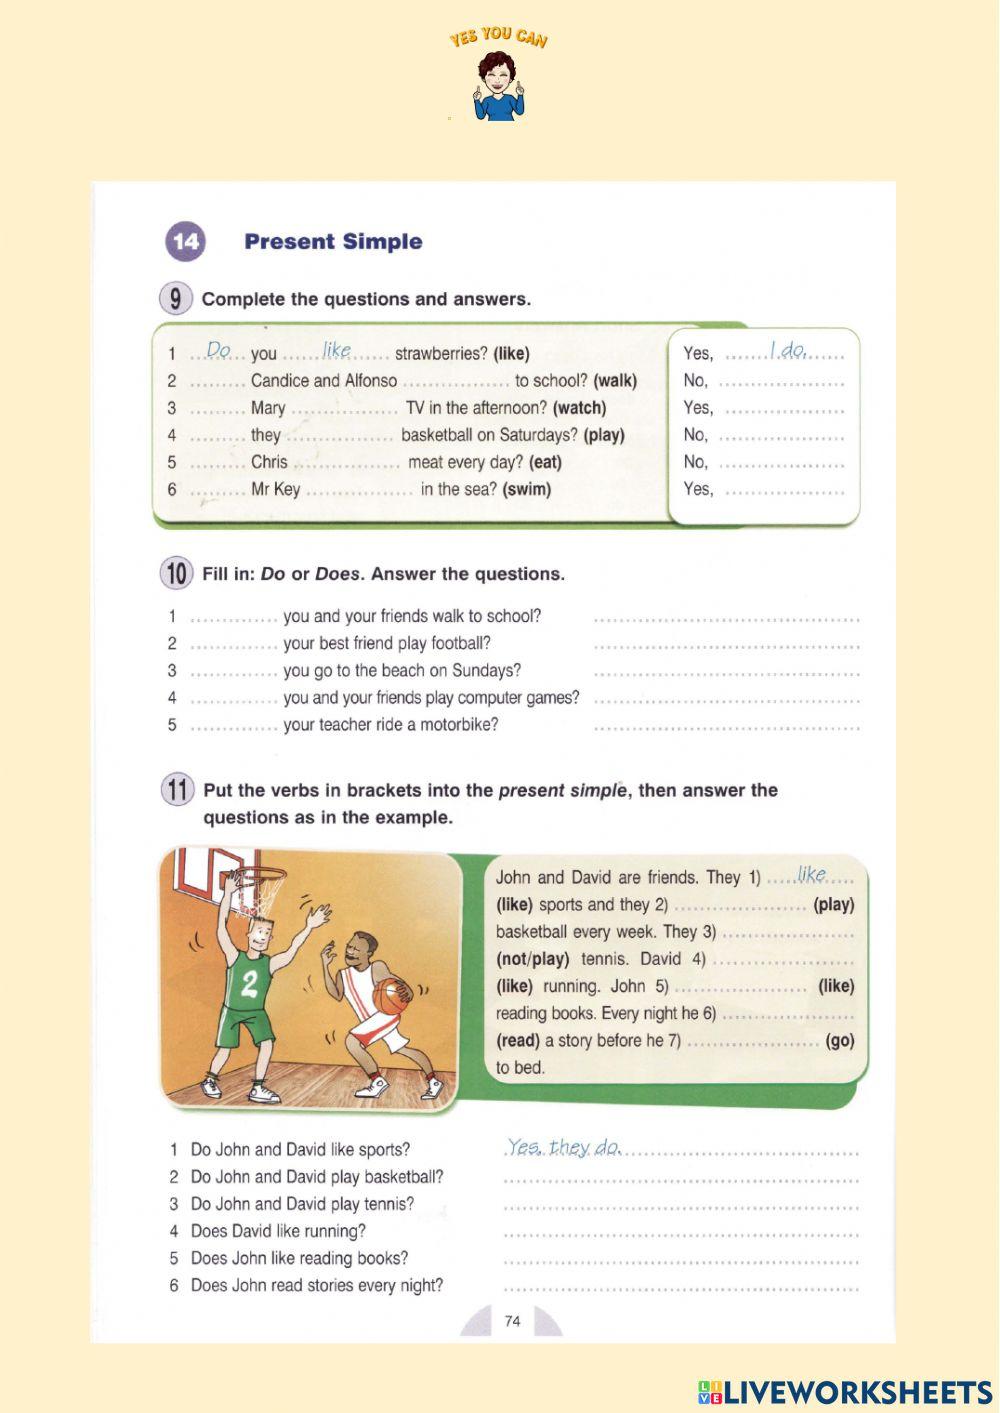 Present simple questions-short answers worksheet | Live Worksheets